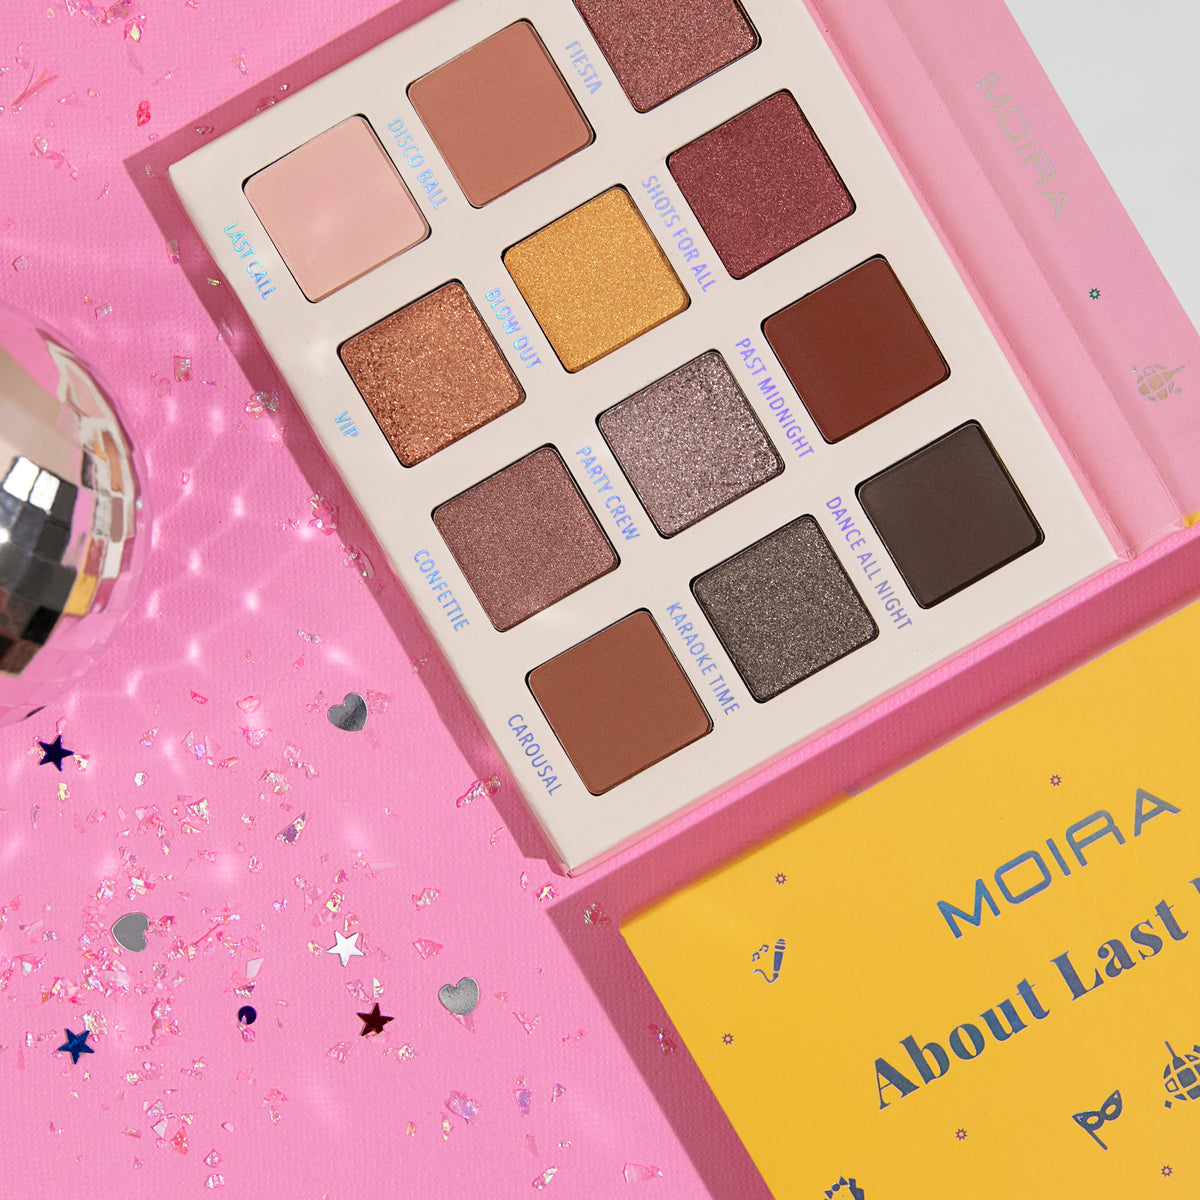 MOIRA Cosmetics on X: Buy one Never Ending LIghts Palette and Get Glow &  Gleam 50% off with code 50OFF 💜💚🥰 Shop:   #palette #makeup #vegan #crueltyfree #glow #cosmeticsales #50off  #shopcosmetics #moira #